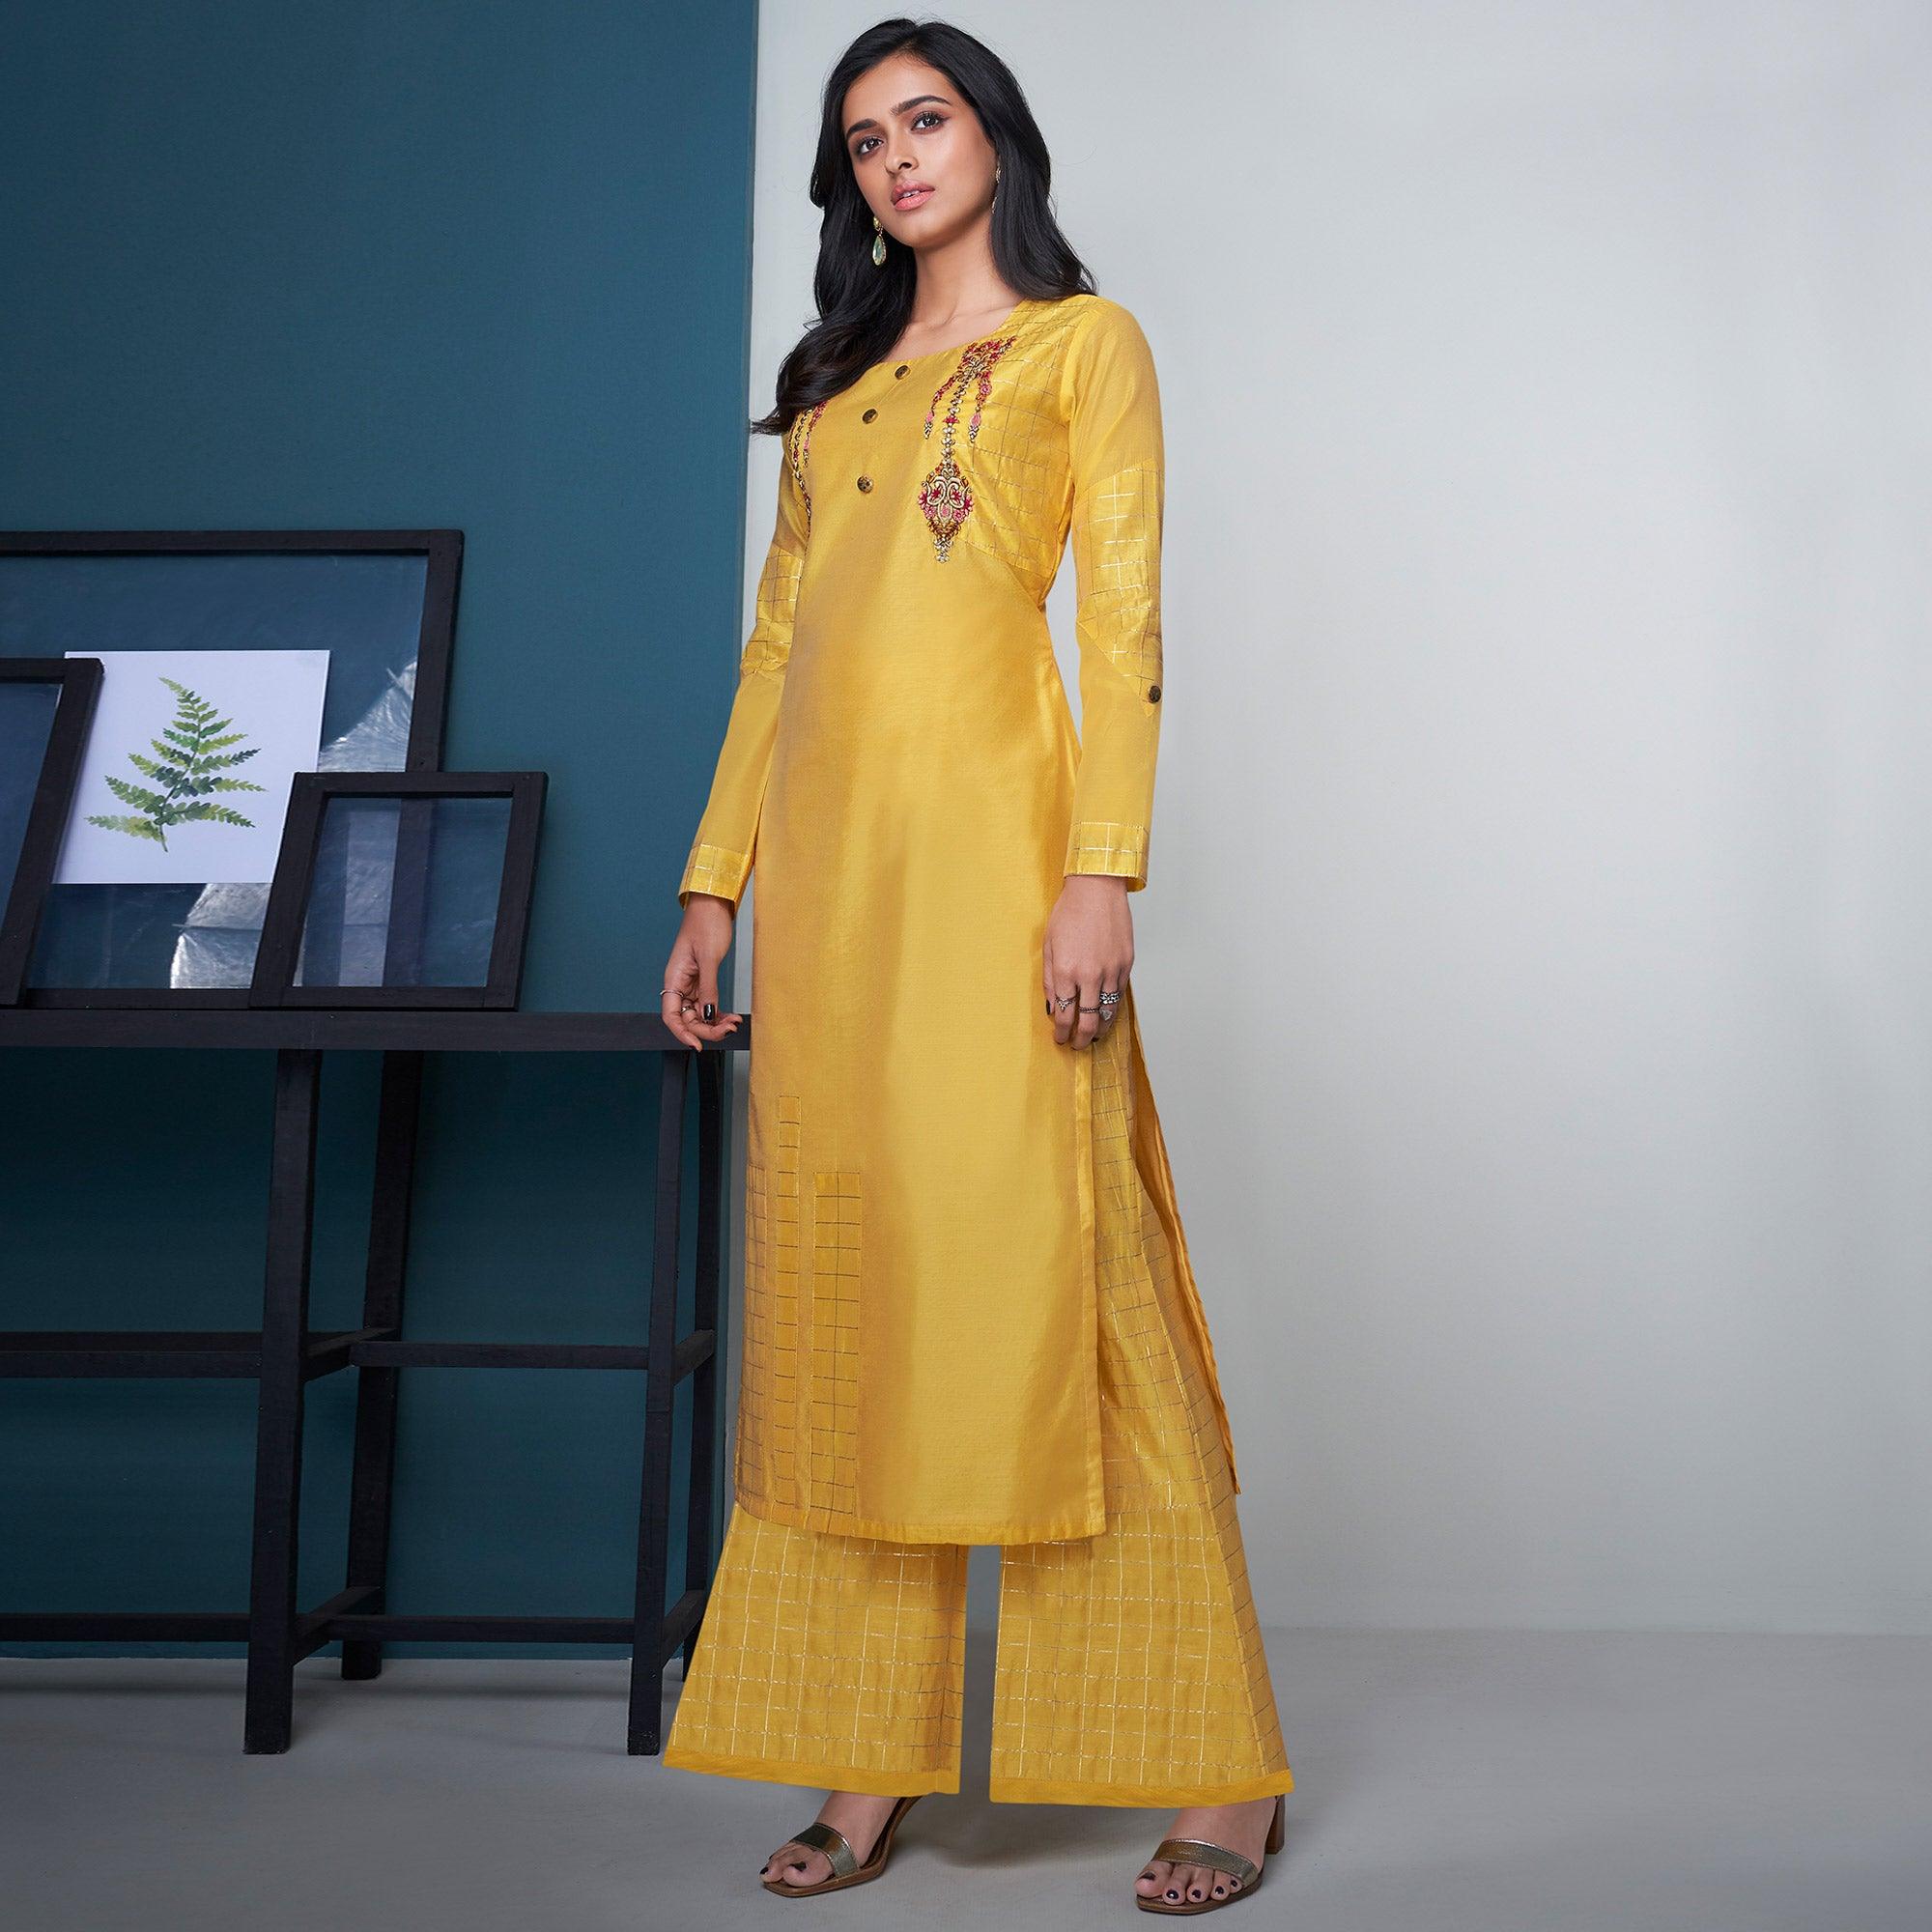 Radiant Yellow Colored Party Wear Floral Embroidered Modal Silk Kurti-Palazzo Set - Peachmode